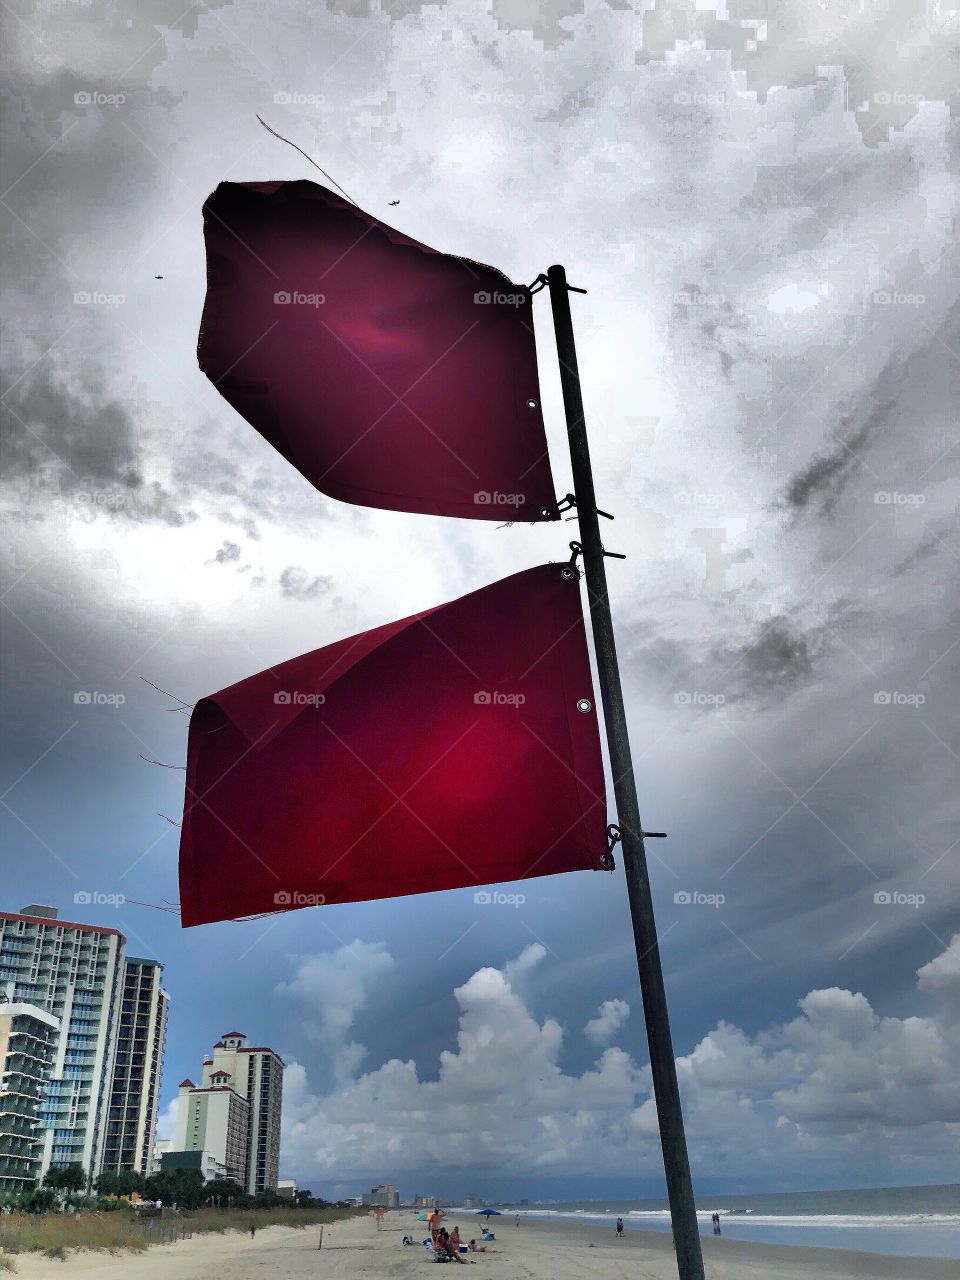 Double red flag warning, no swimming due to strong rip currents in advance of approaching Hurricane. 